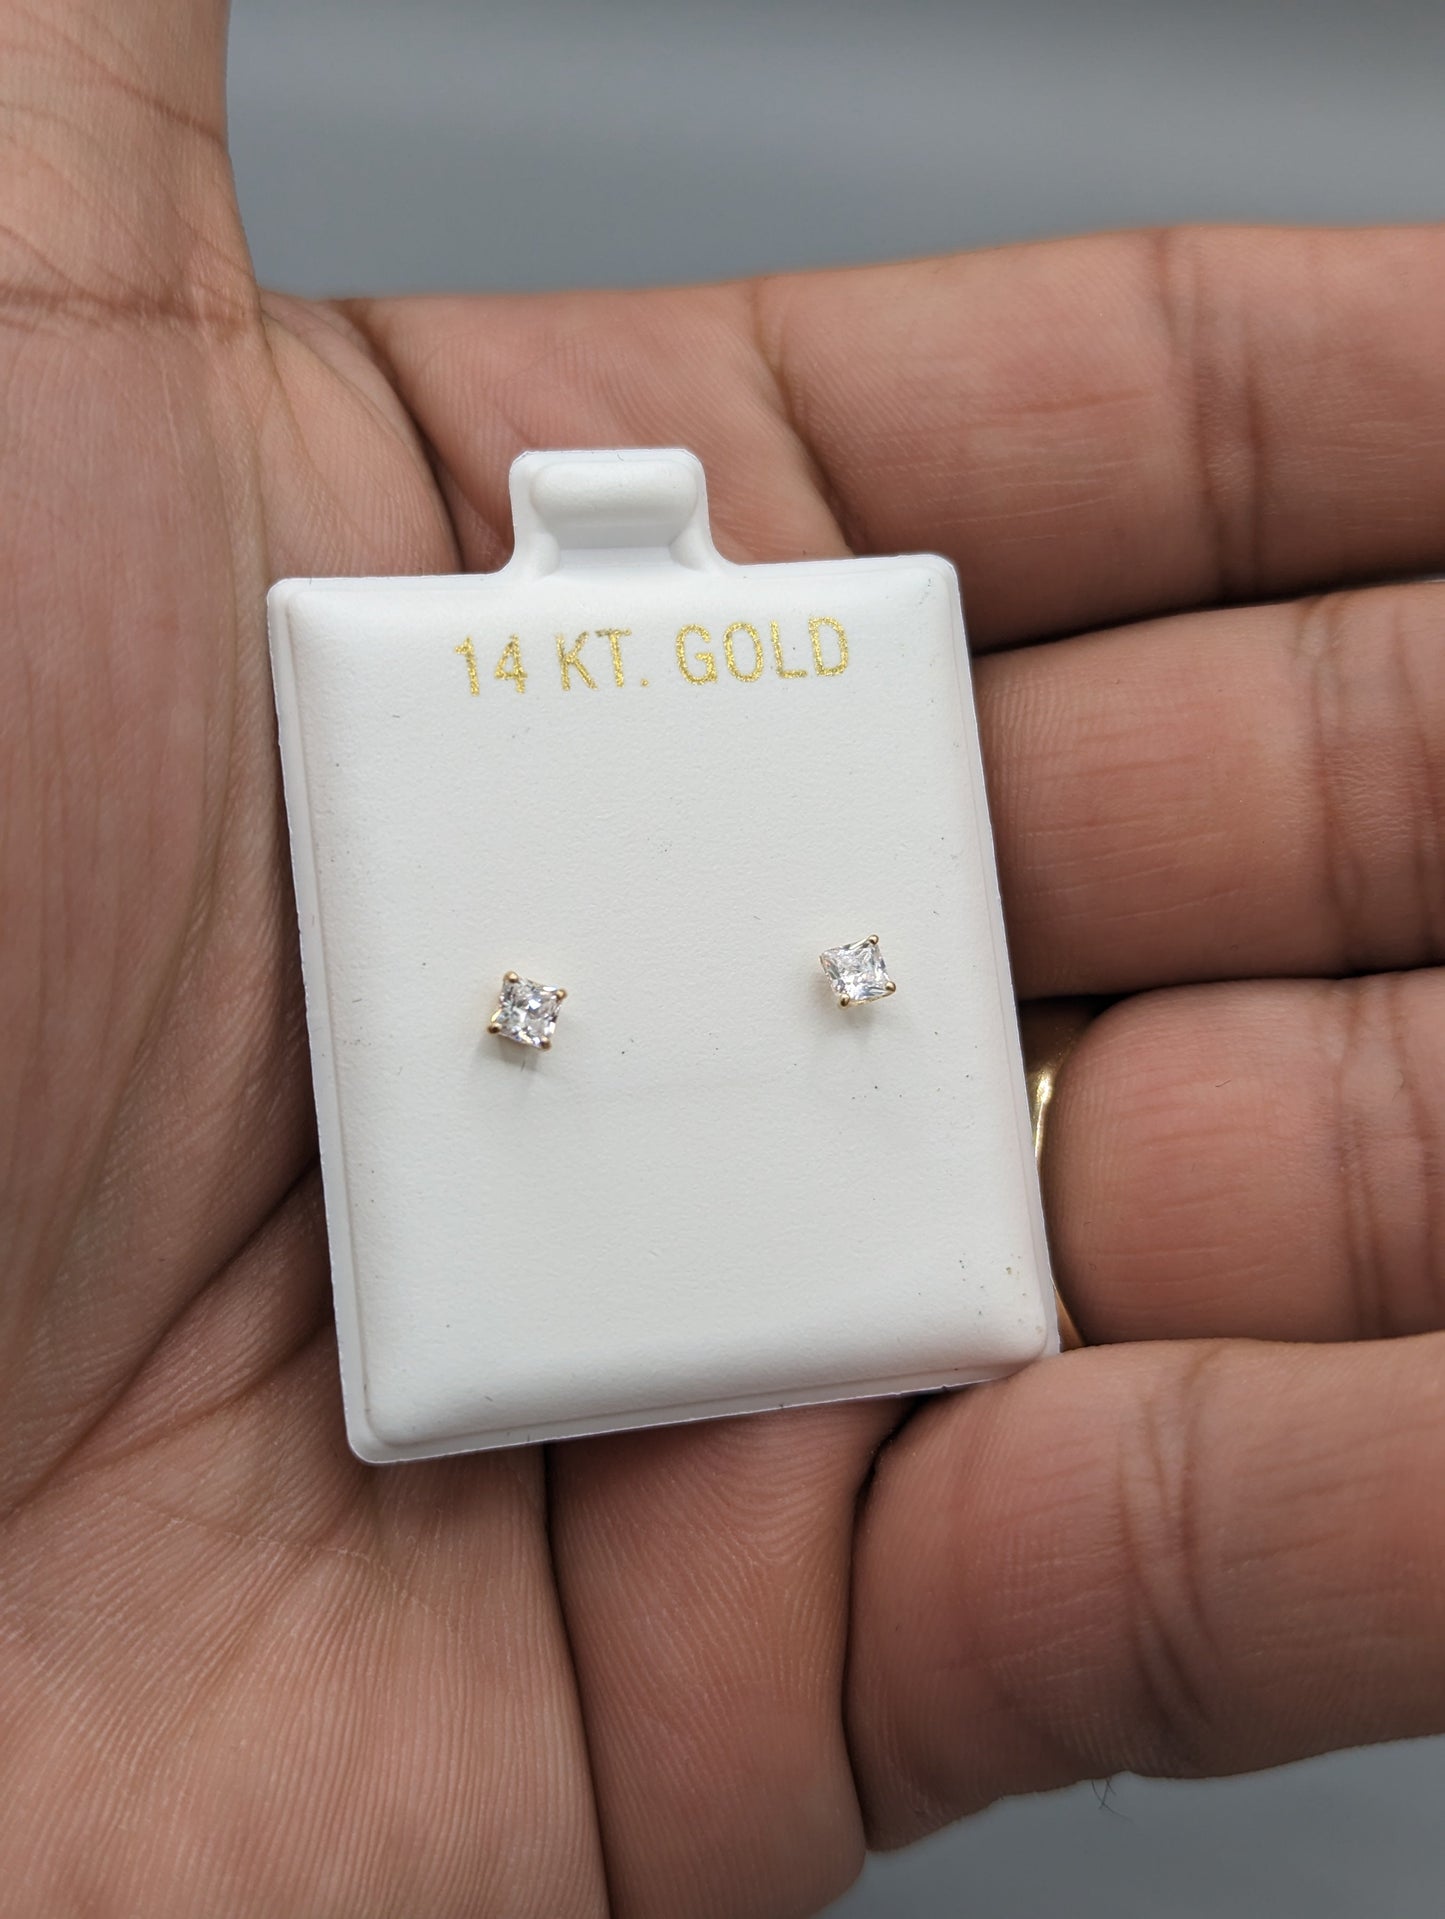 14k Earrings with cz stones - 1 PER ORDER!